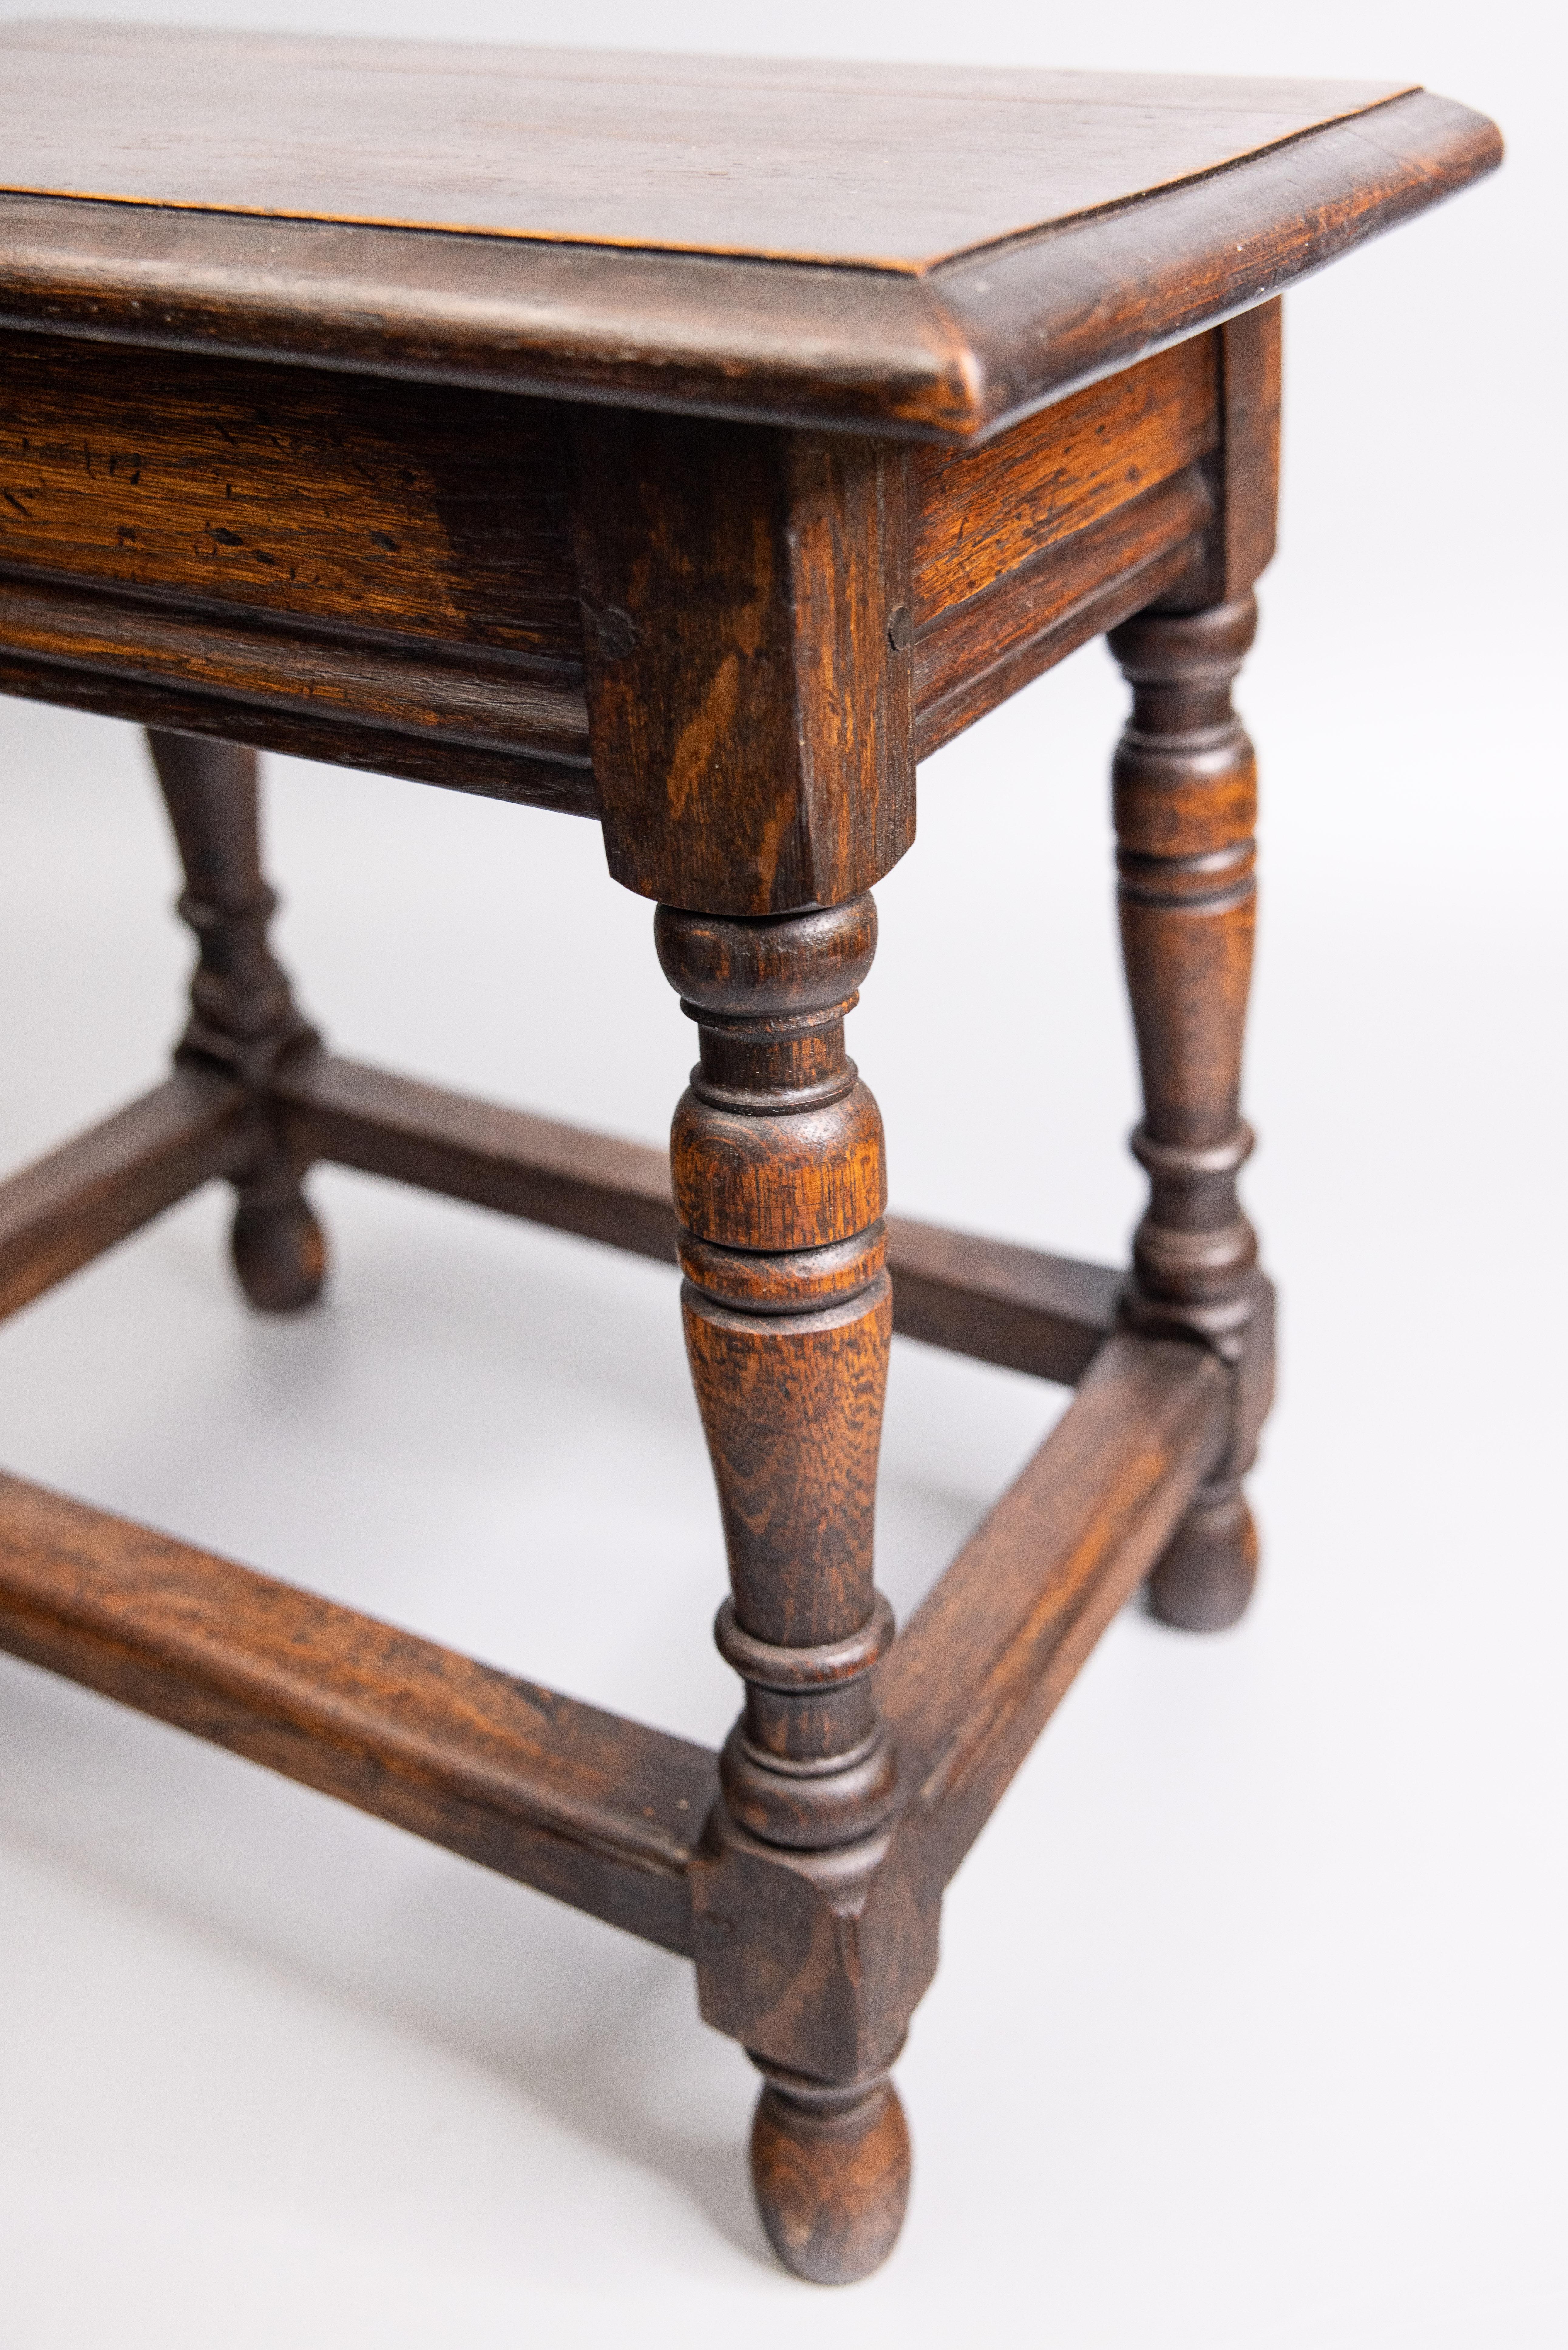 19th Century English Oak Pegged Joint Stool Side Table 4